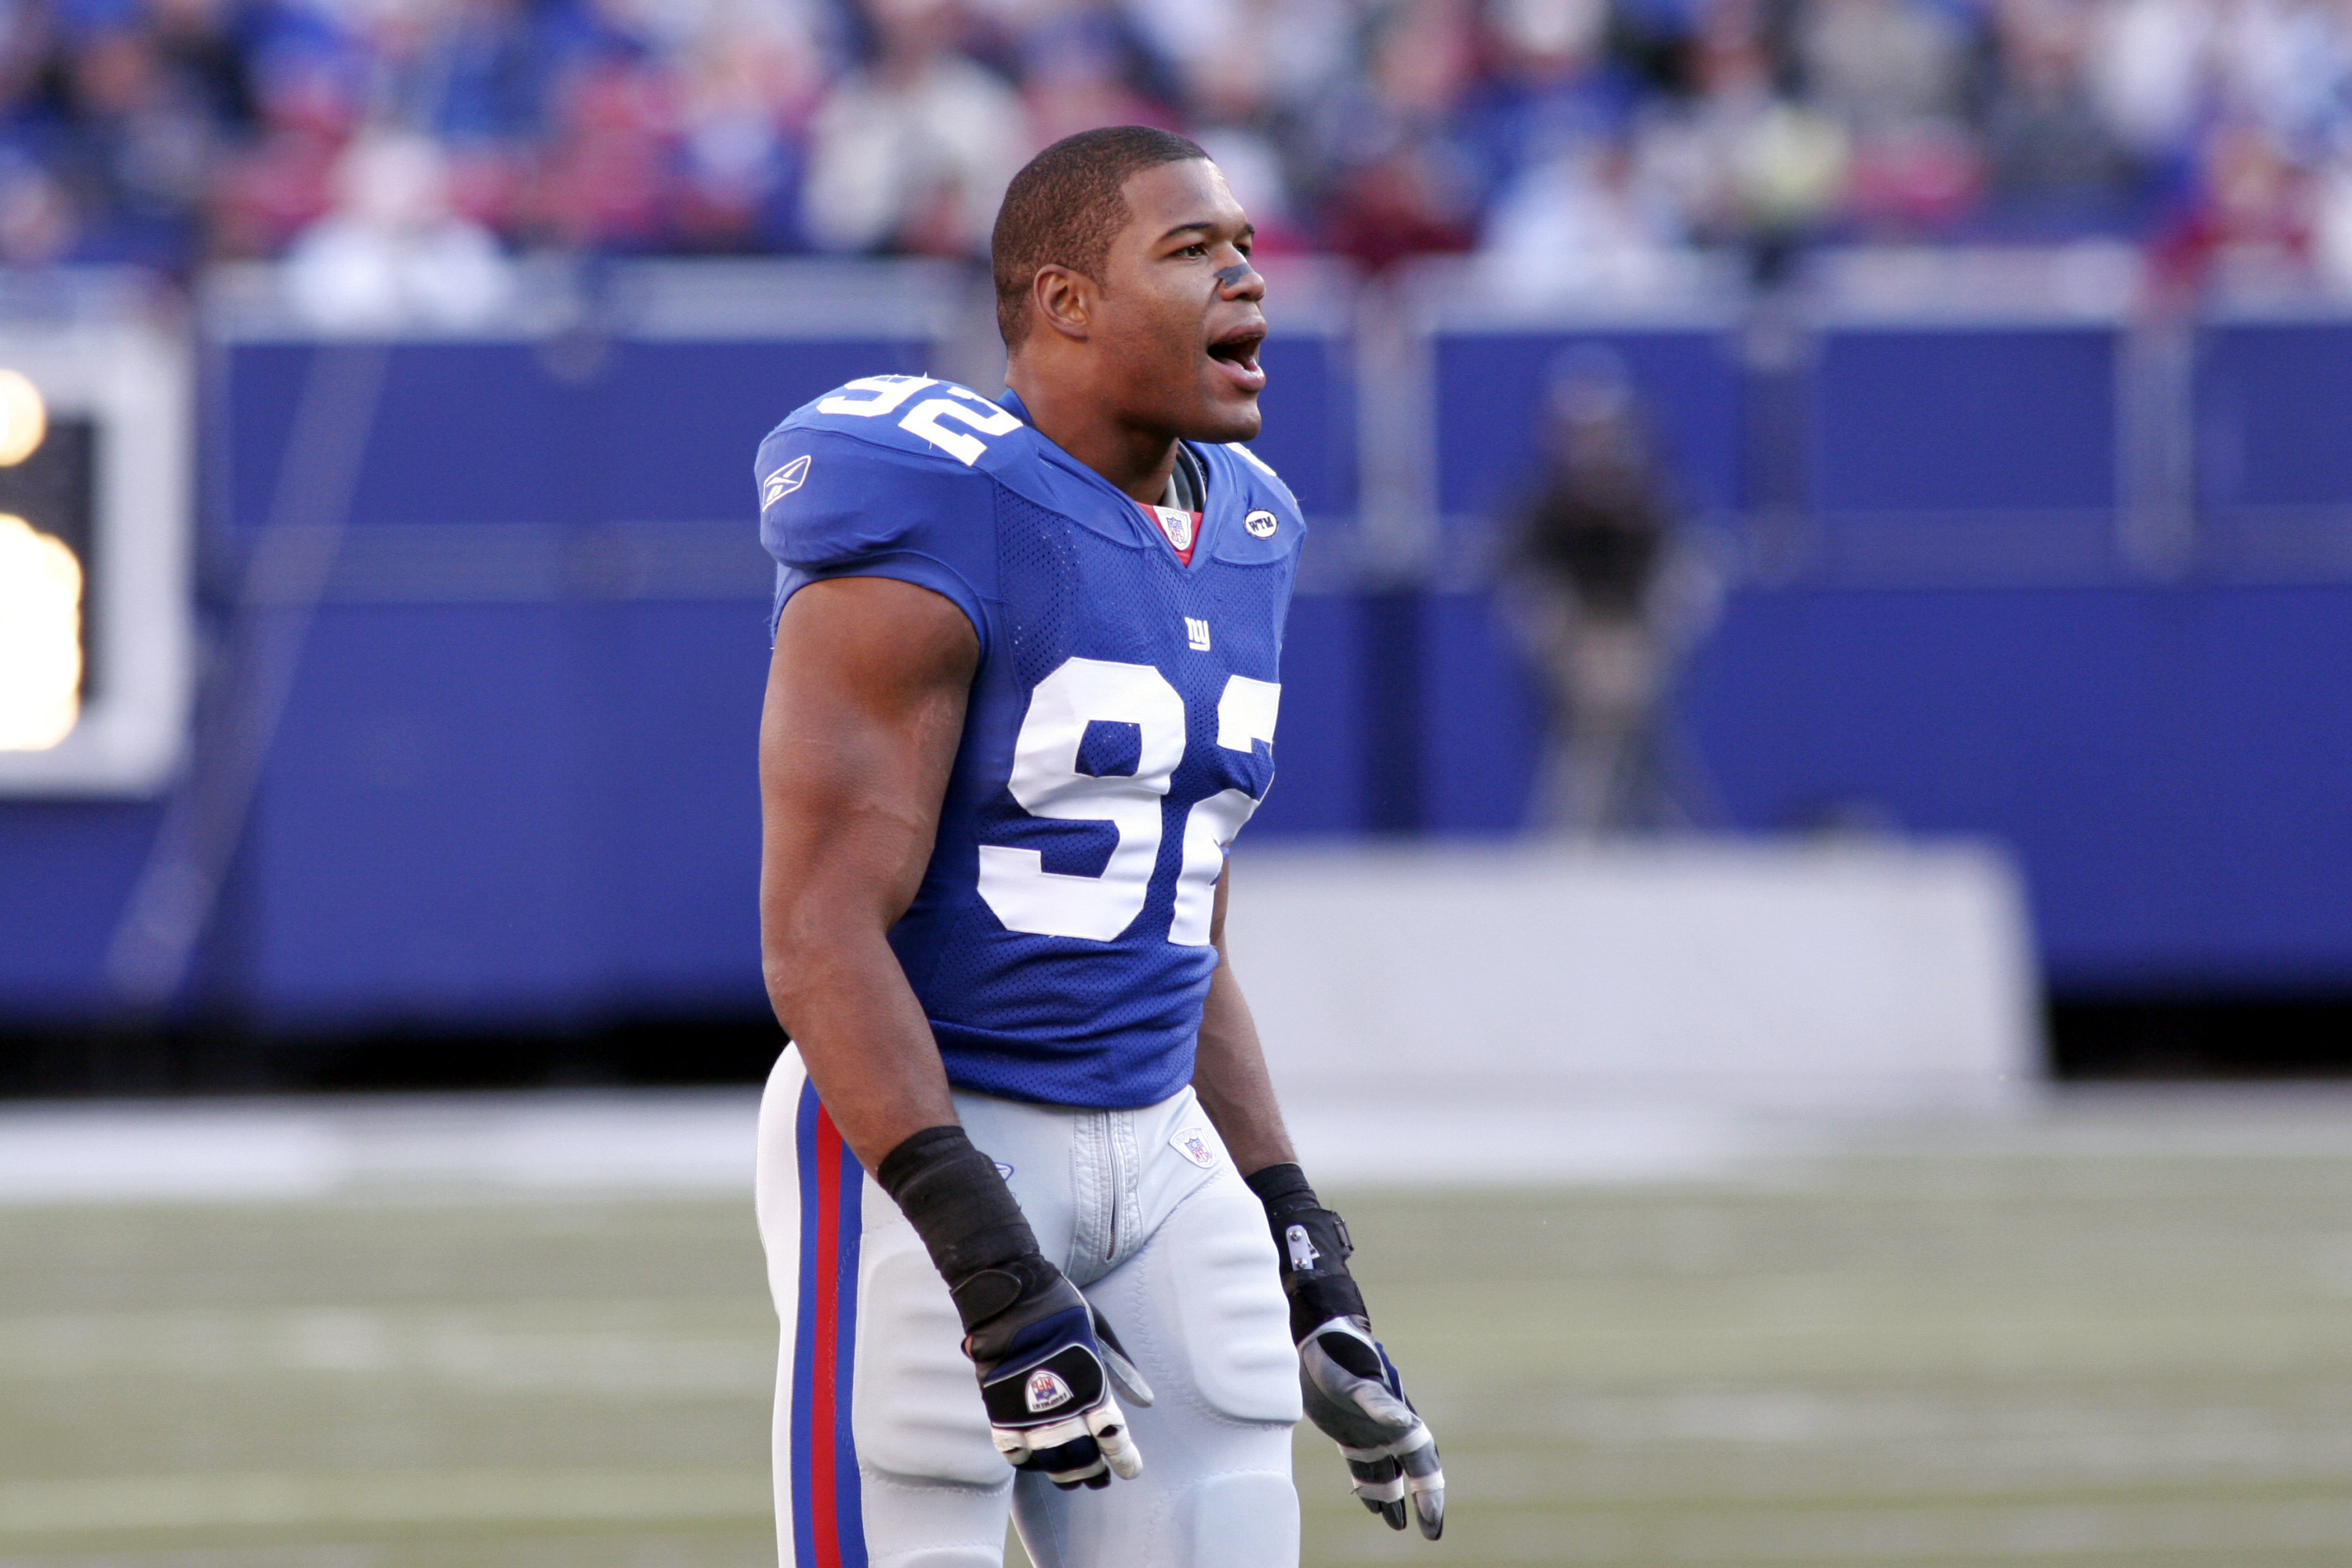 New York Giants defensive end Michael Strahan celebrates during a game